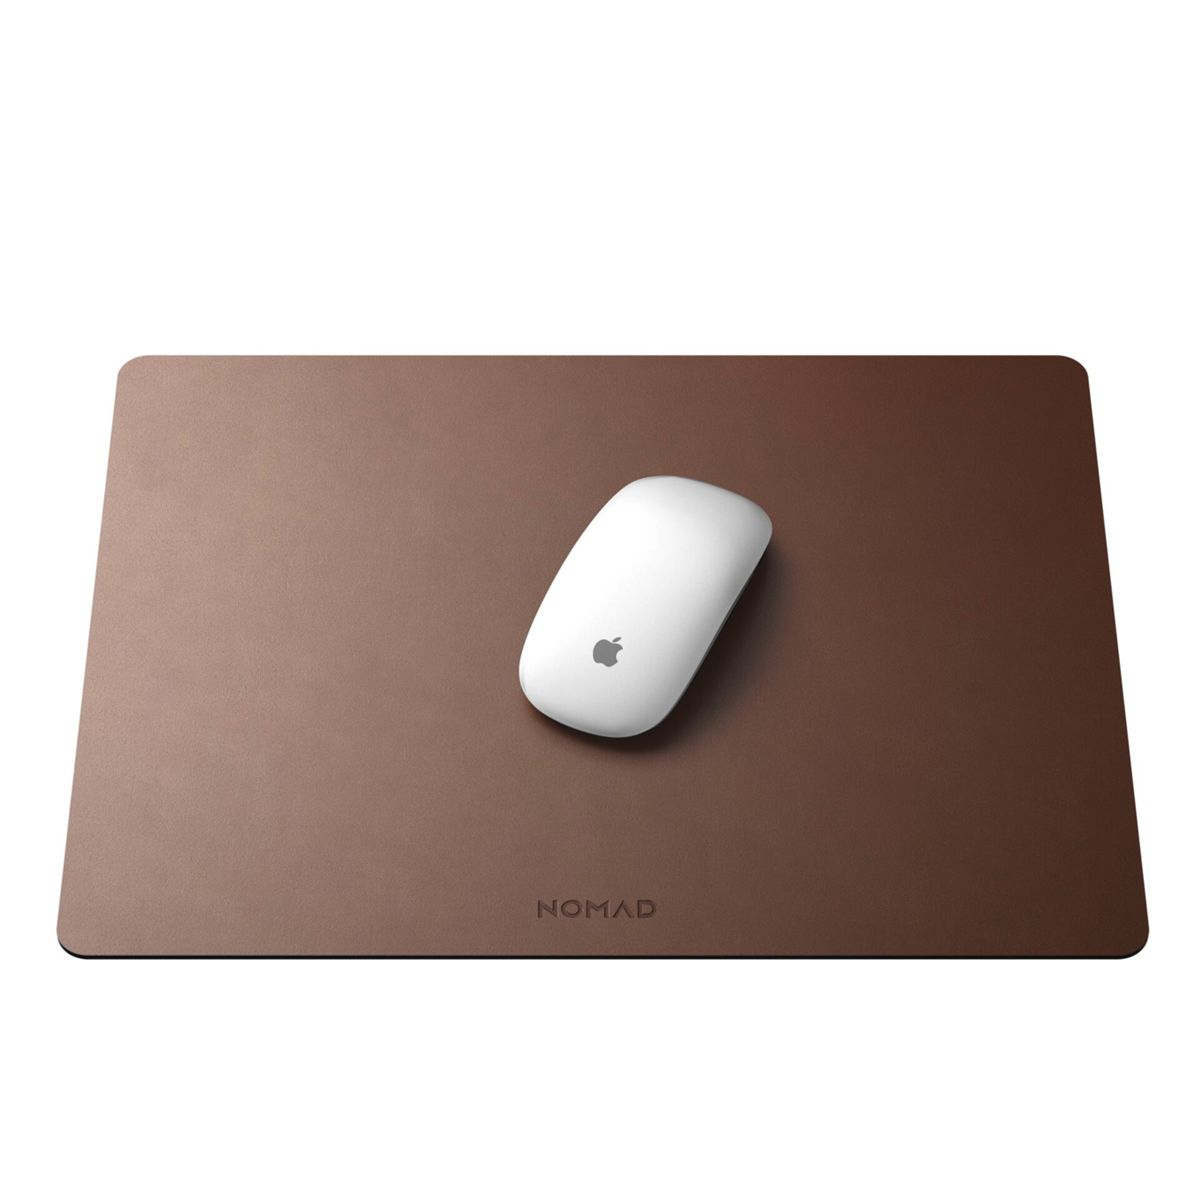 Mauspad 16-Inch, Brown Leather NOMAD Rustic Mousepad